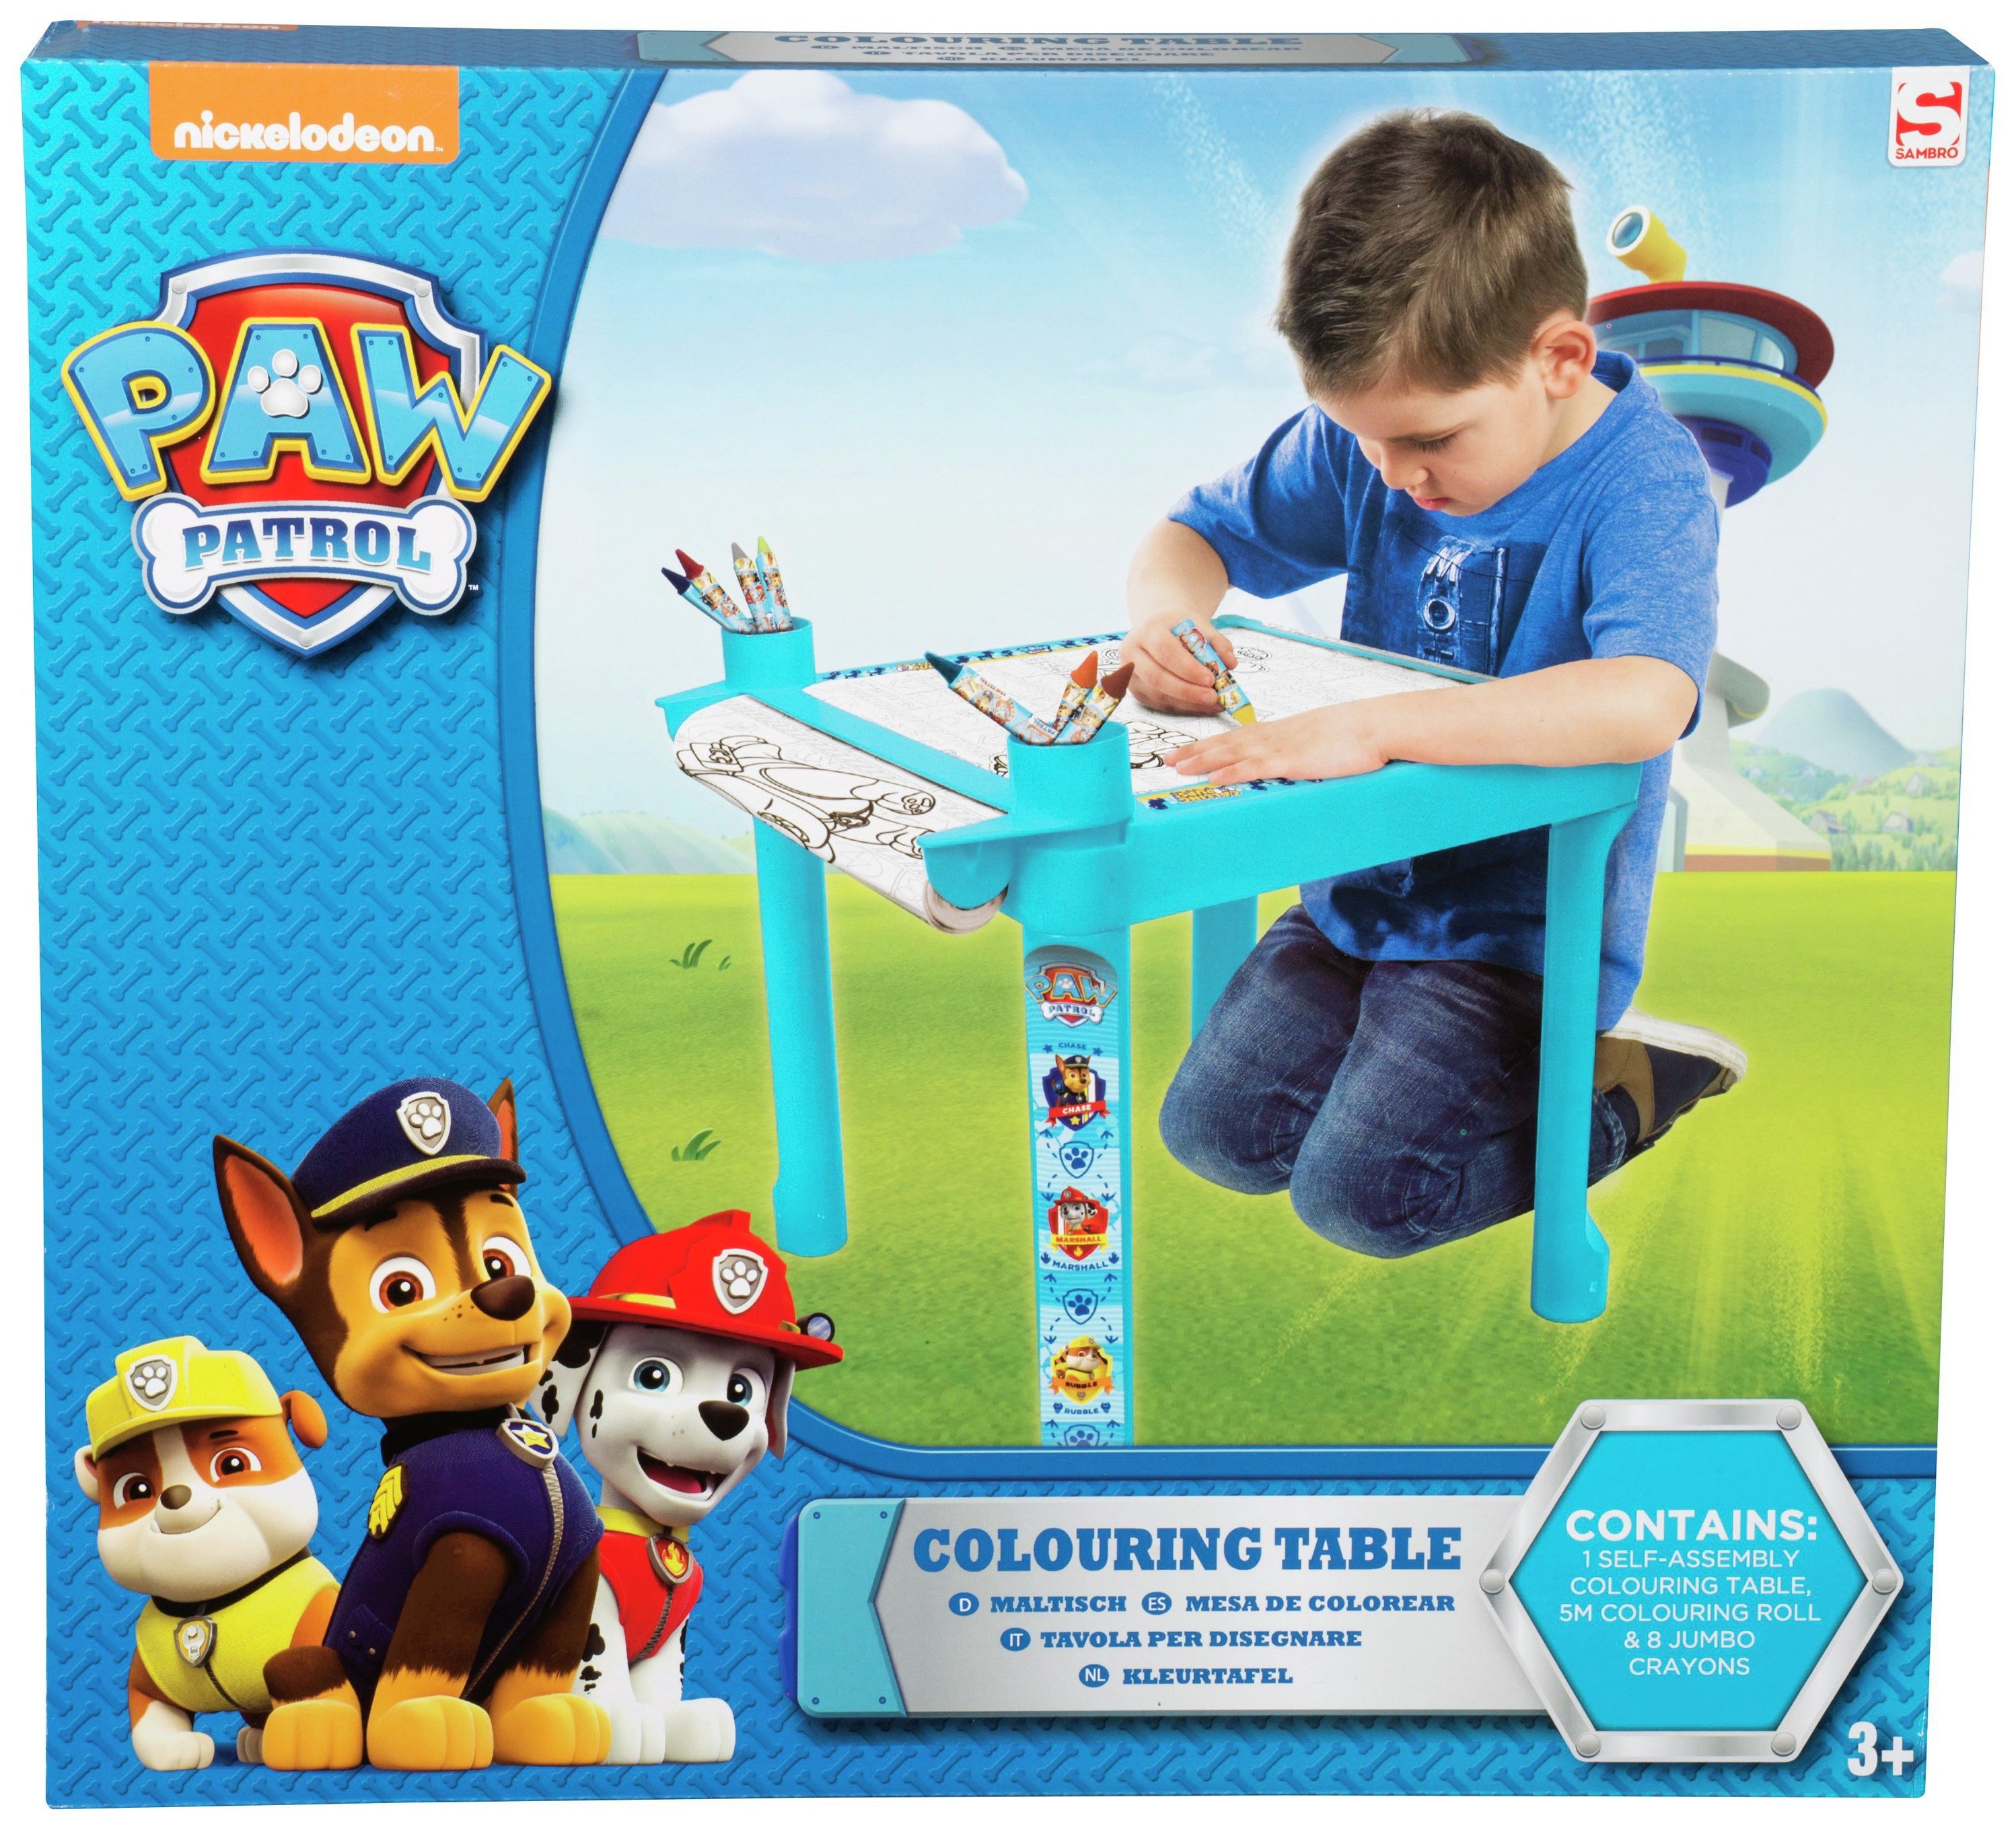 Paw Patrol Colouring Table